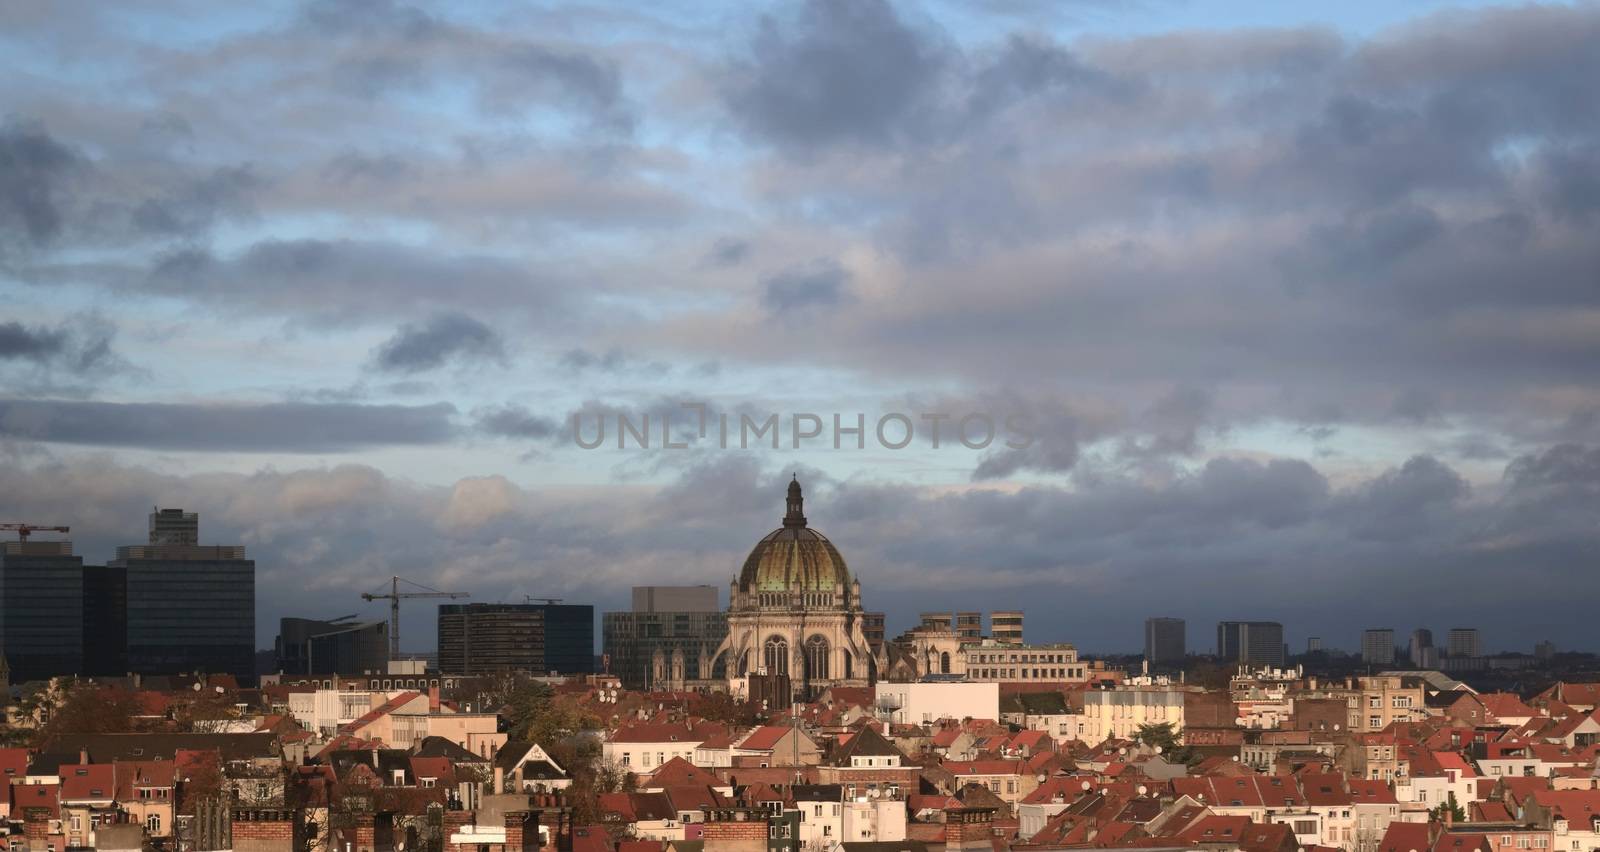 Cityscape of Brussels, Belgium, with the dome of Saint Mary's Royal Church at the center.